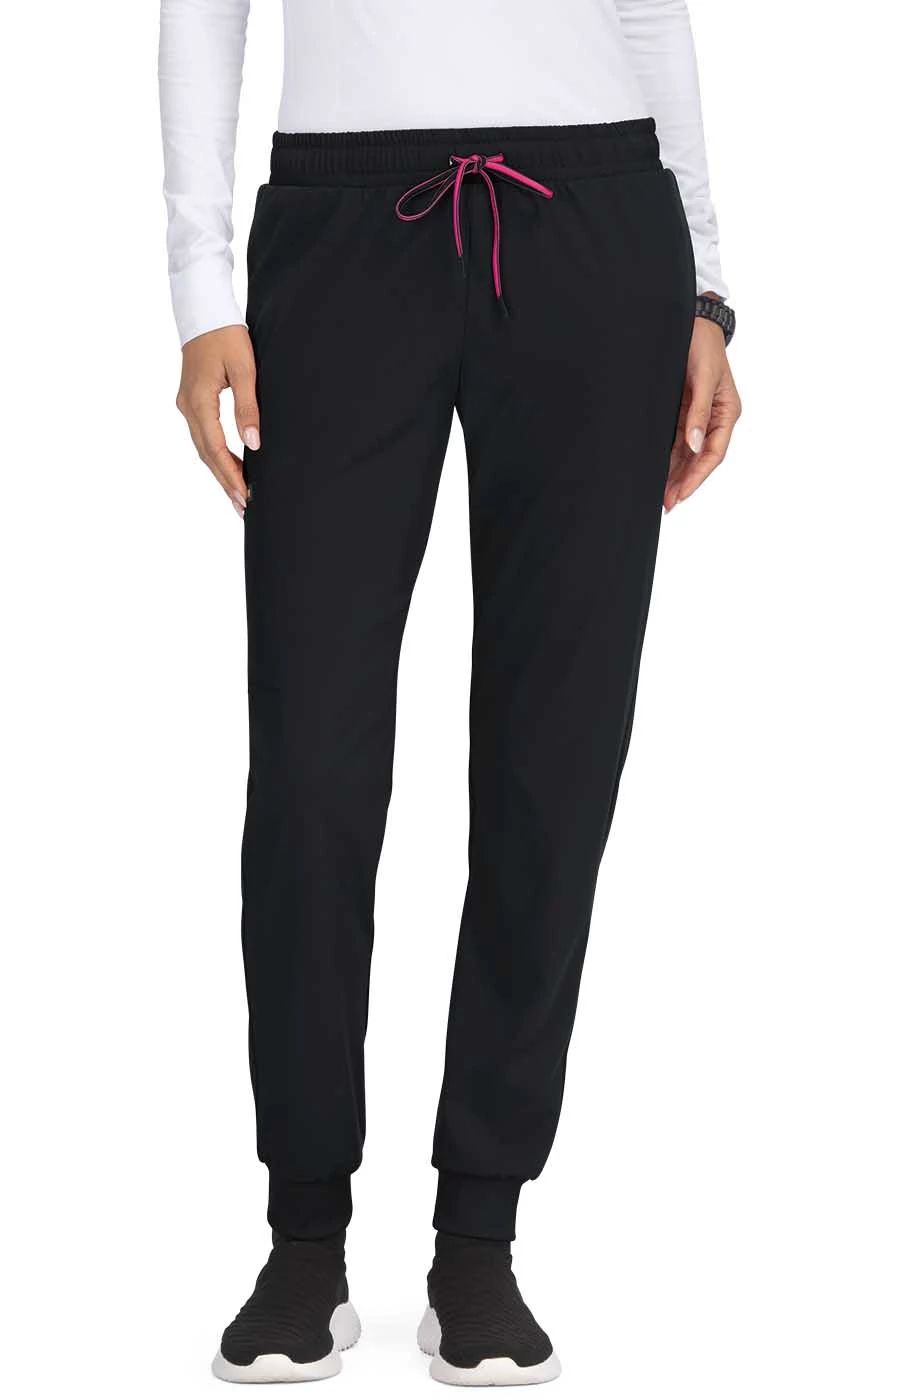 French Bull Shanelle Jogger Pant by Koi